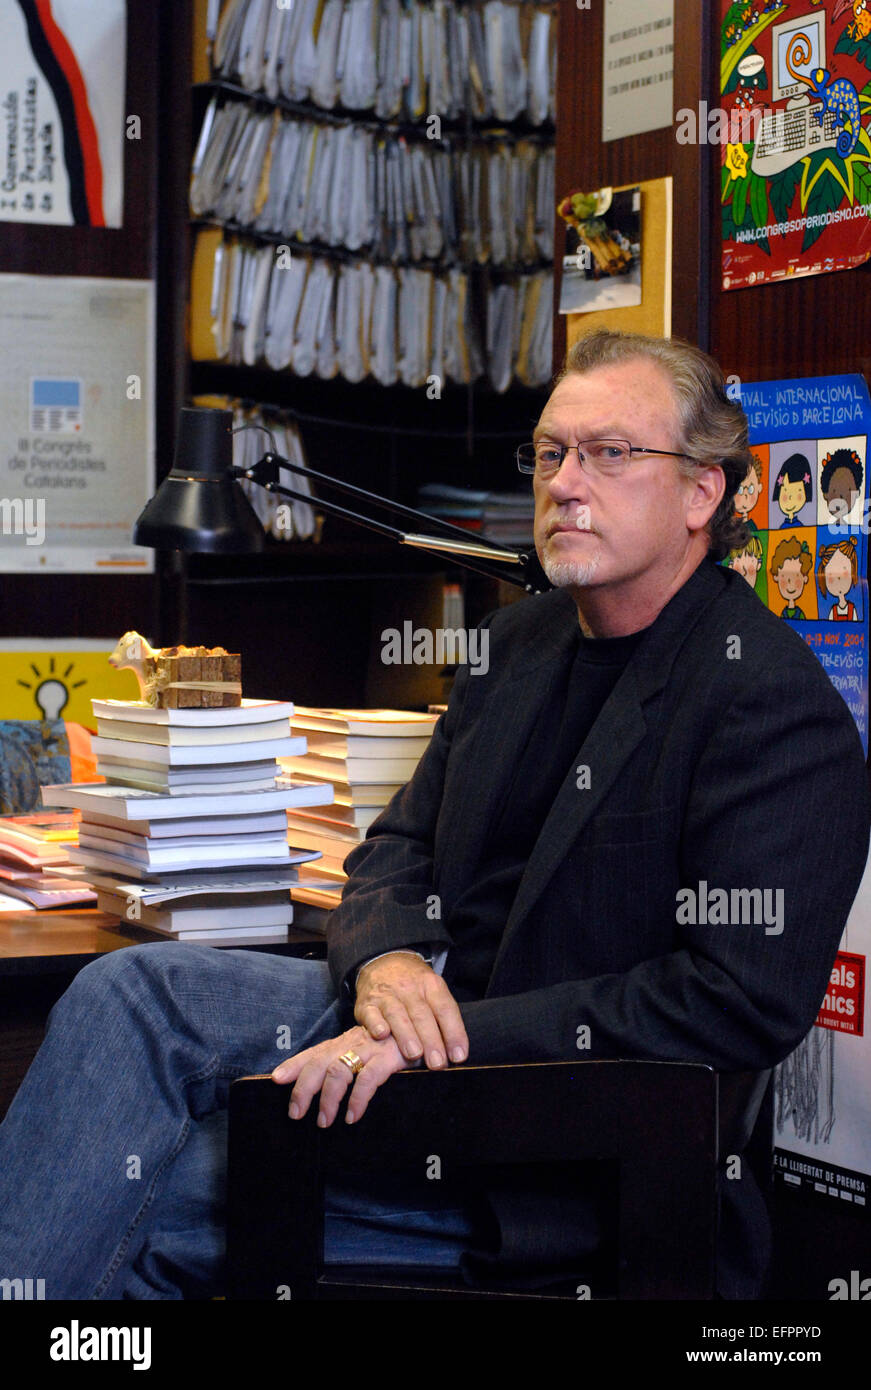 Jon Lee Anderson, Portrait of the American author, biographer and journalist, at a book shop in Barcelona. Stock Photo